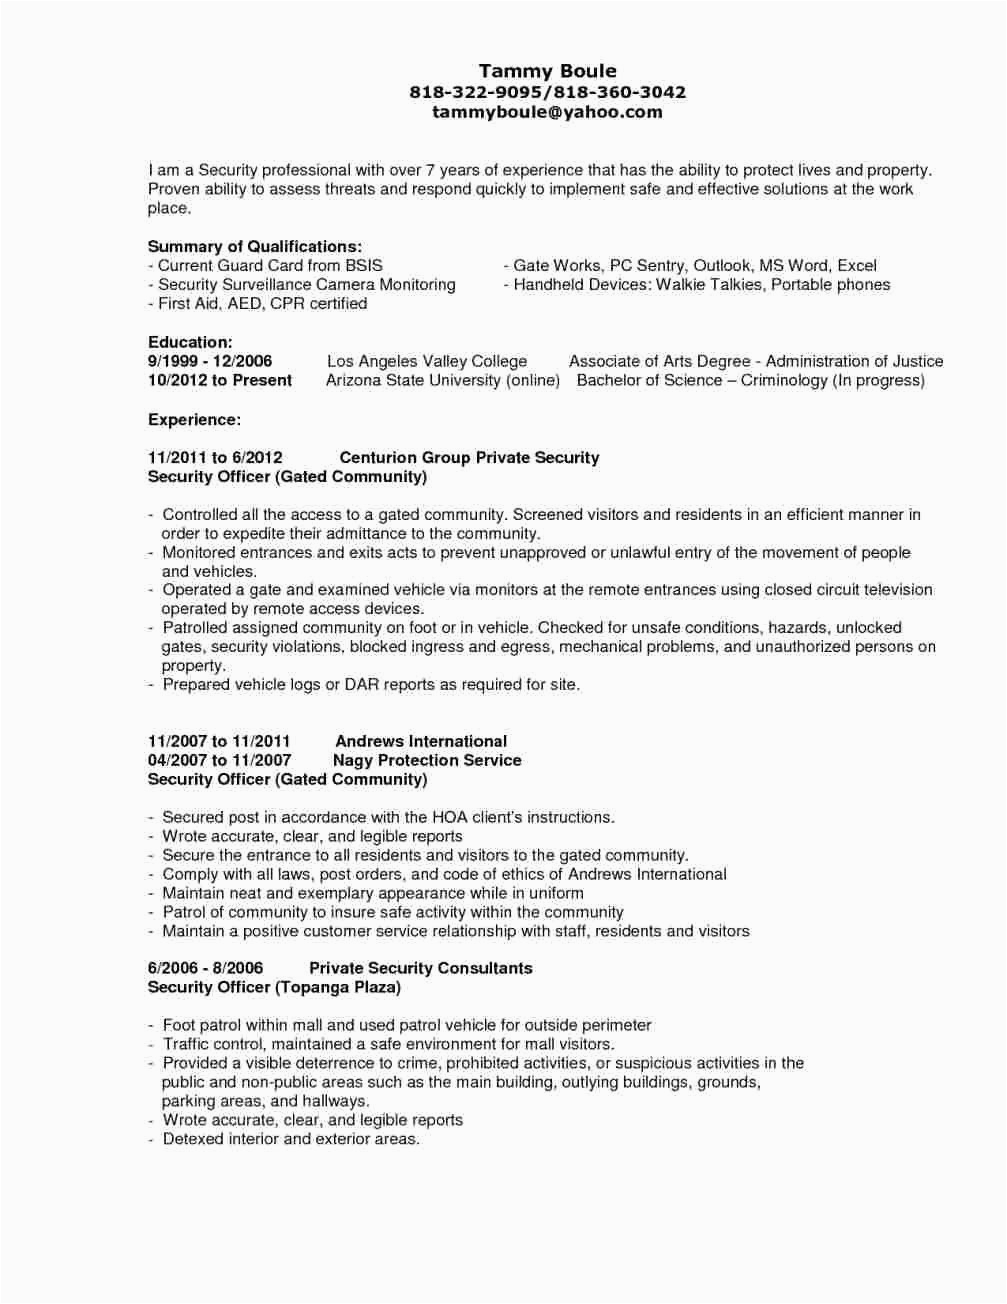 Resume Samples for Reentering the Workplace Reentering the Workforce Resume Examples